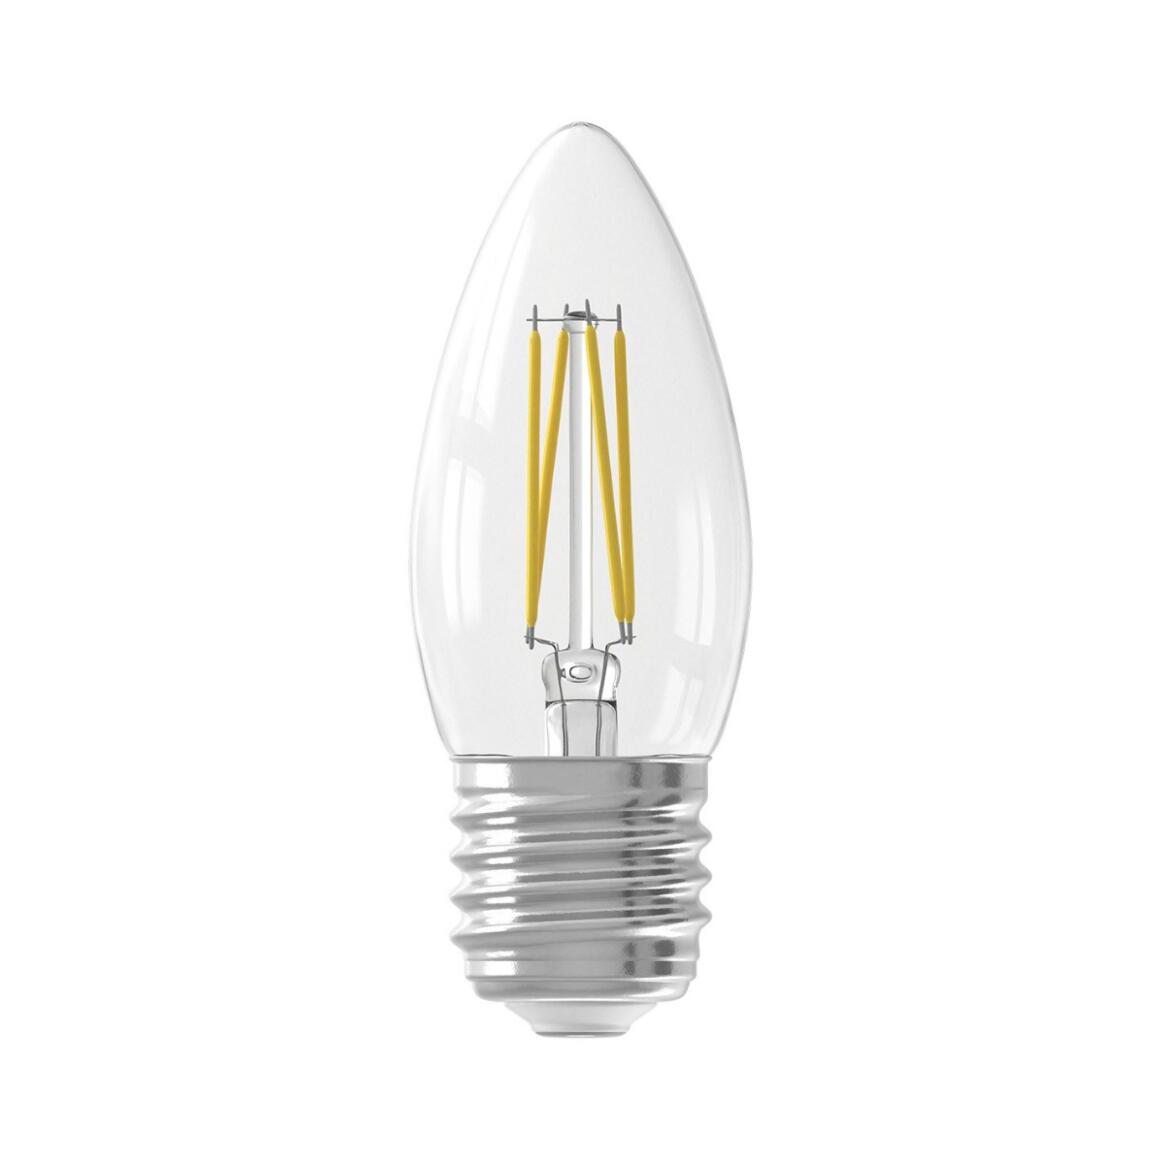 LED Filament Candle Bulb Warm White Dimmable E27 3.5W 2700k 350lm 9.3cm main product image